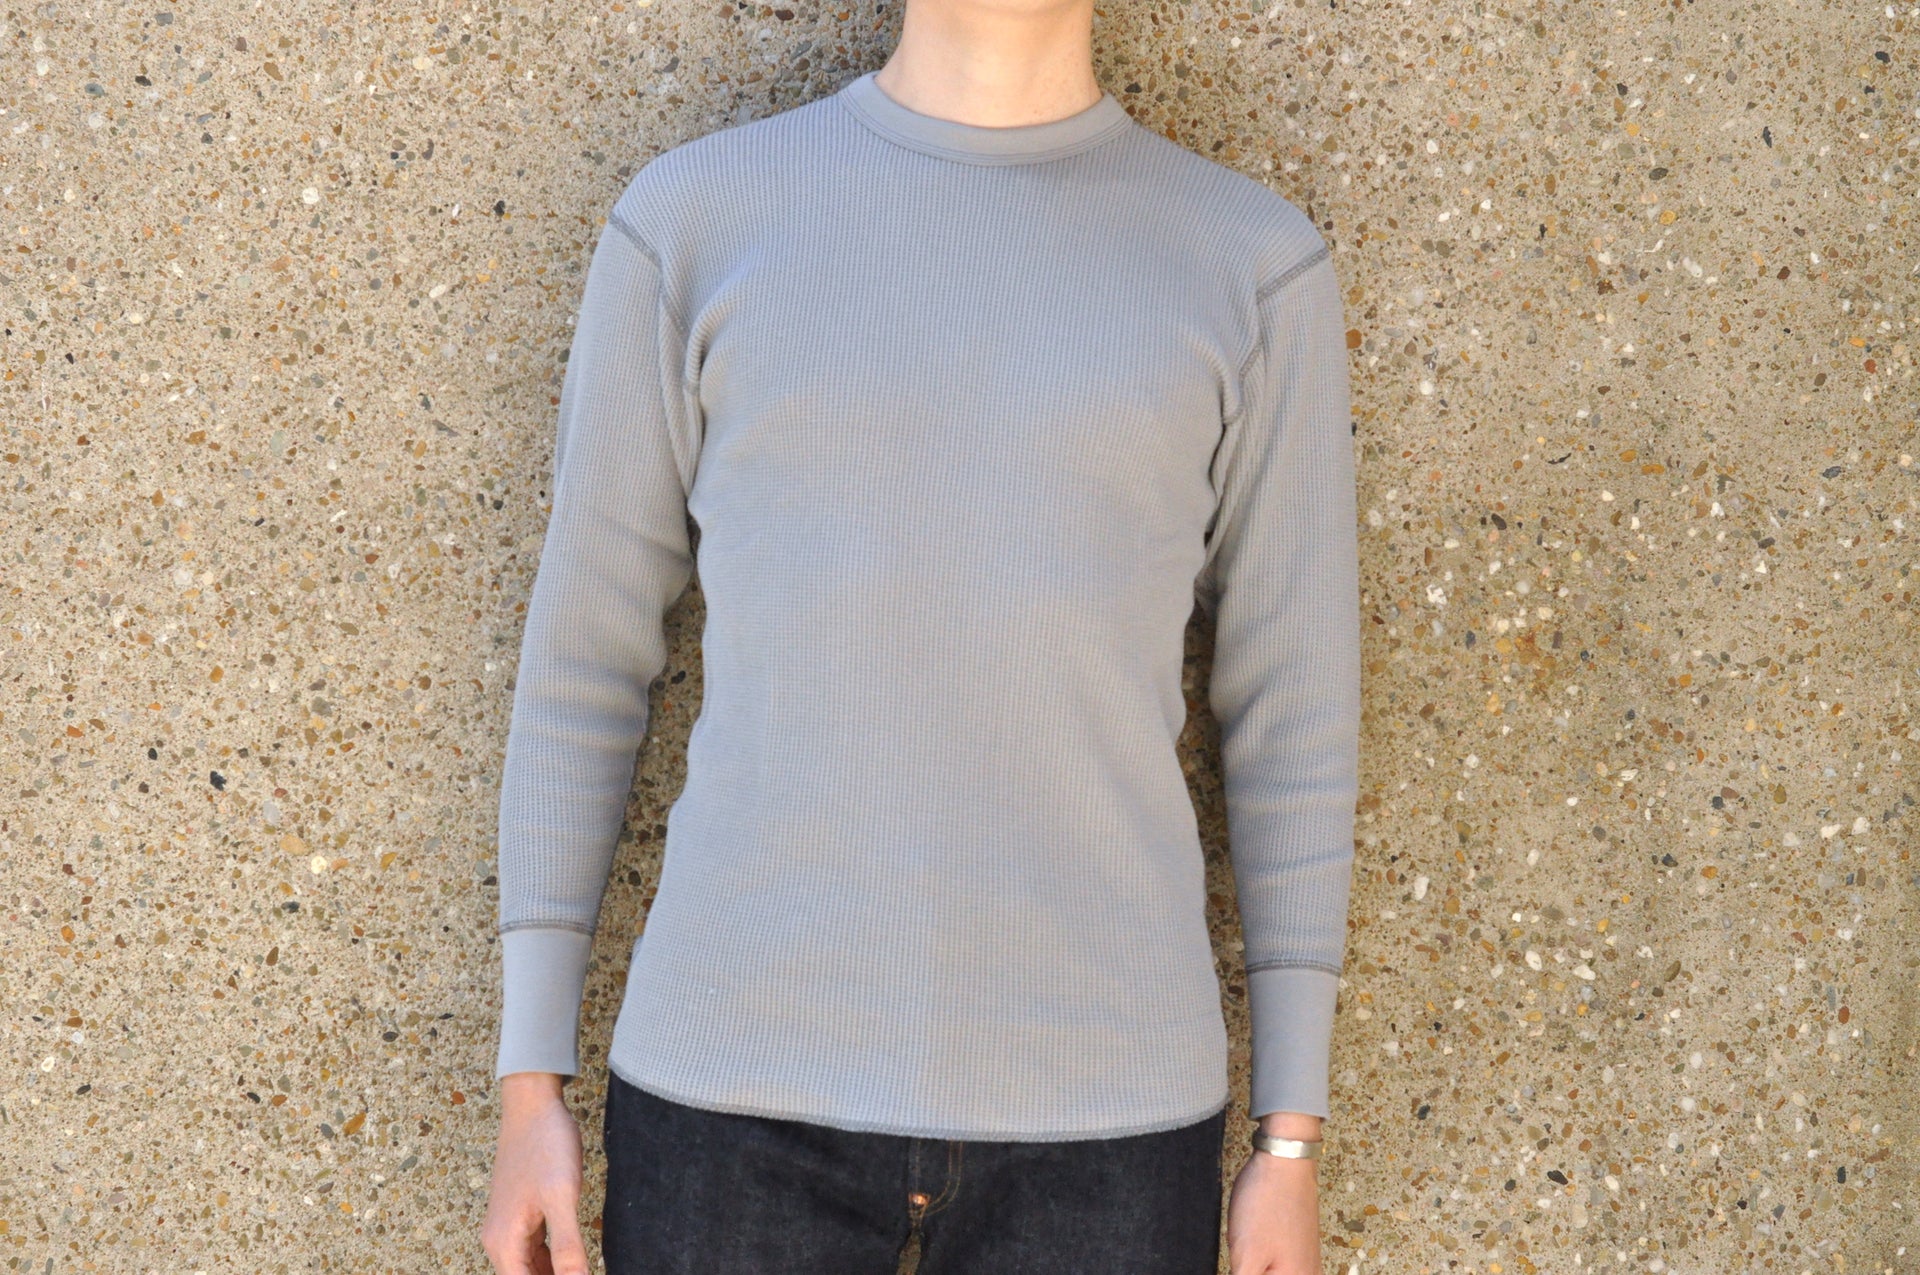 Freewheelers "Crew Neck" L/S Thermal (Silver Grey)